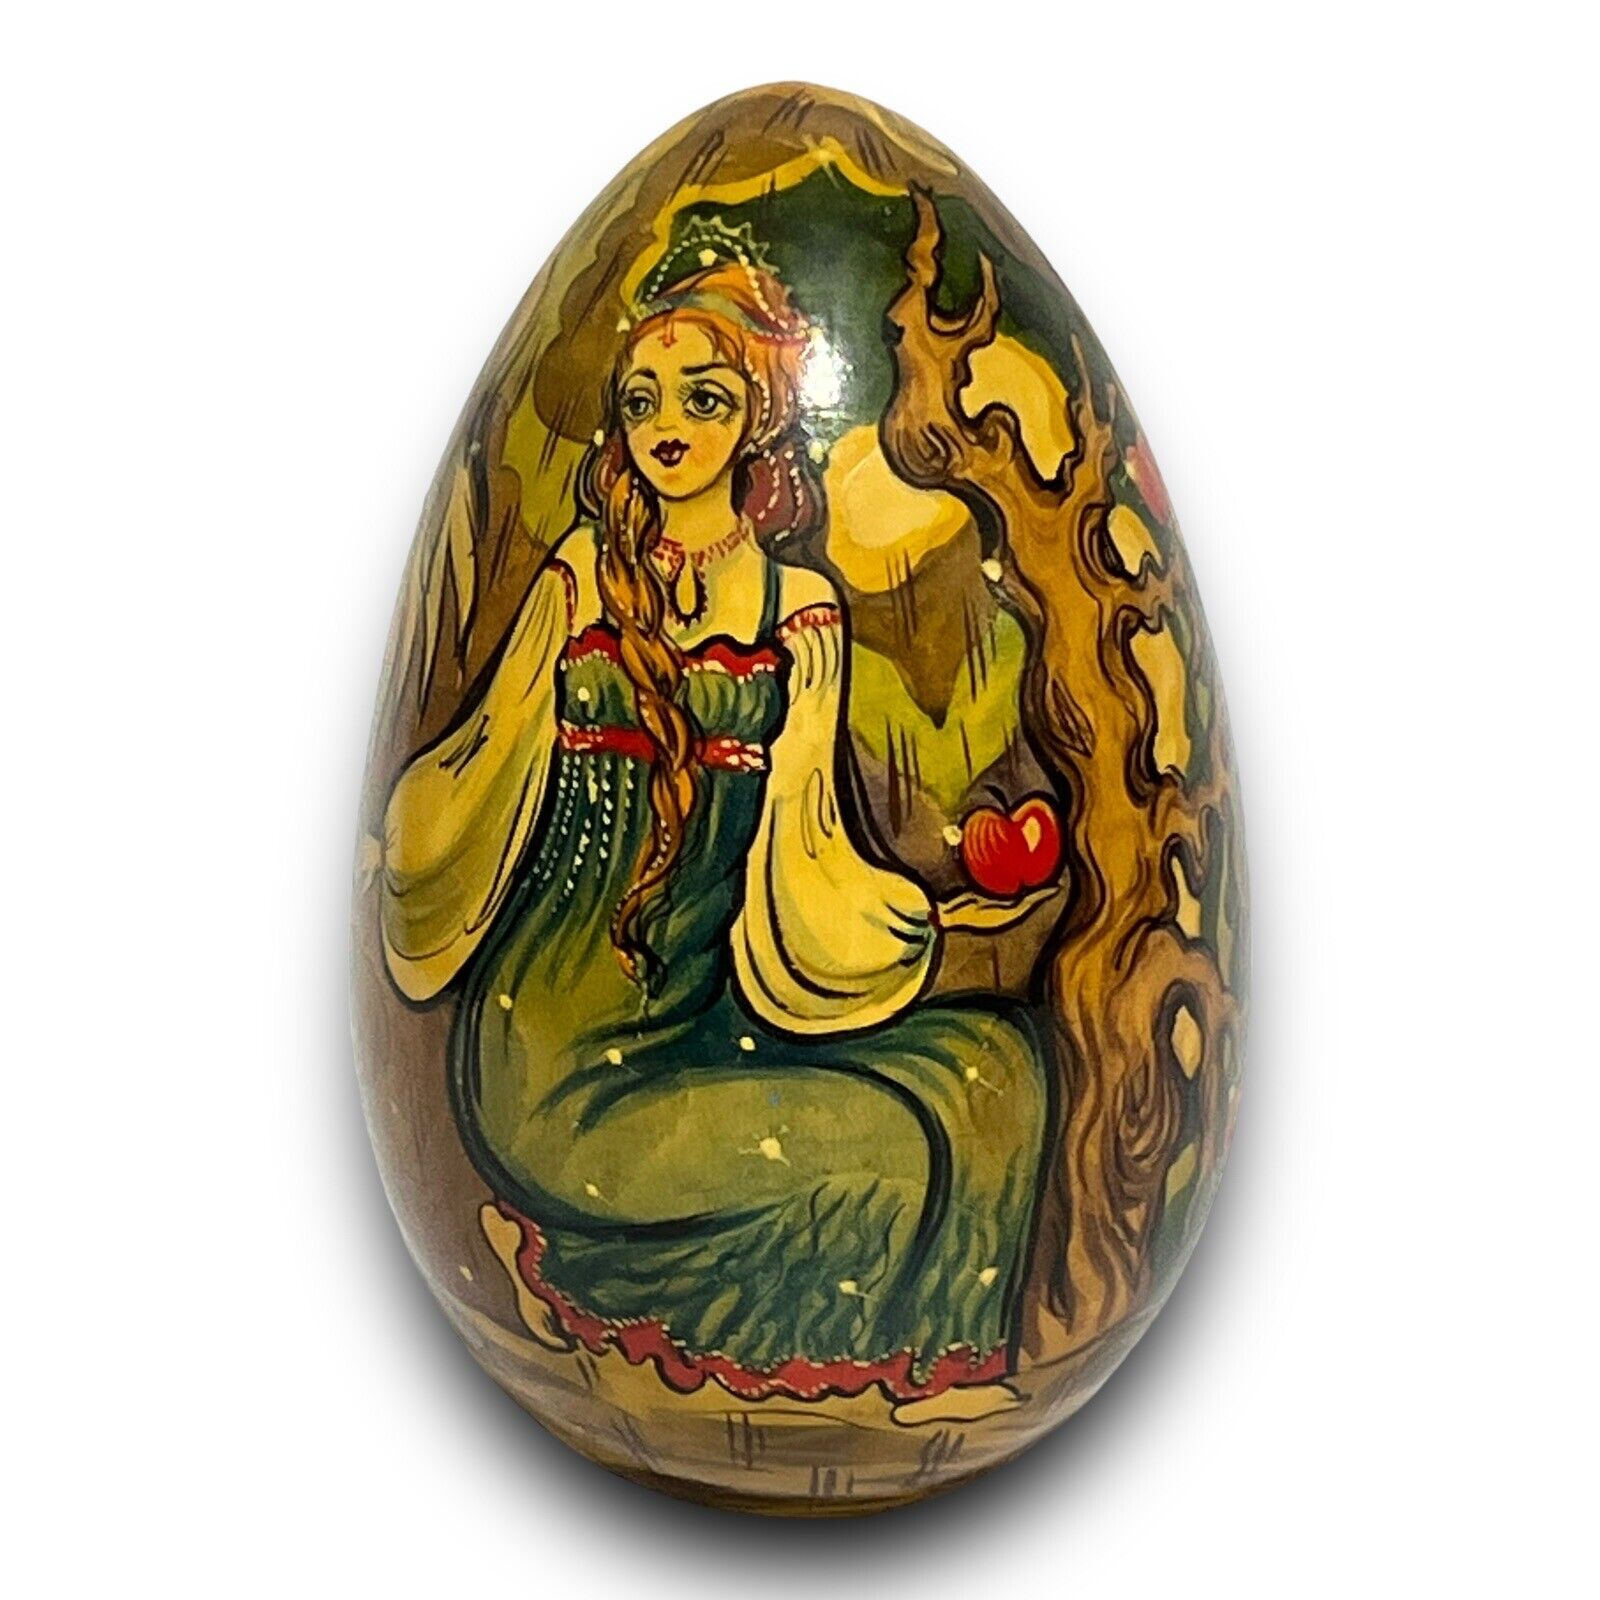 Russian Vintage Wooden Hand Painted Egg Lacquer Princes With Forbidden Apple